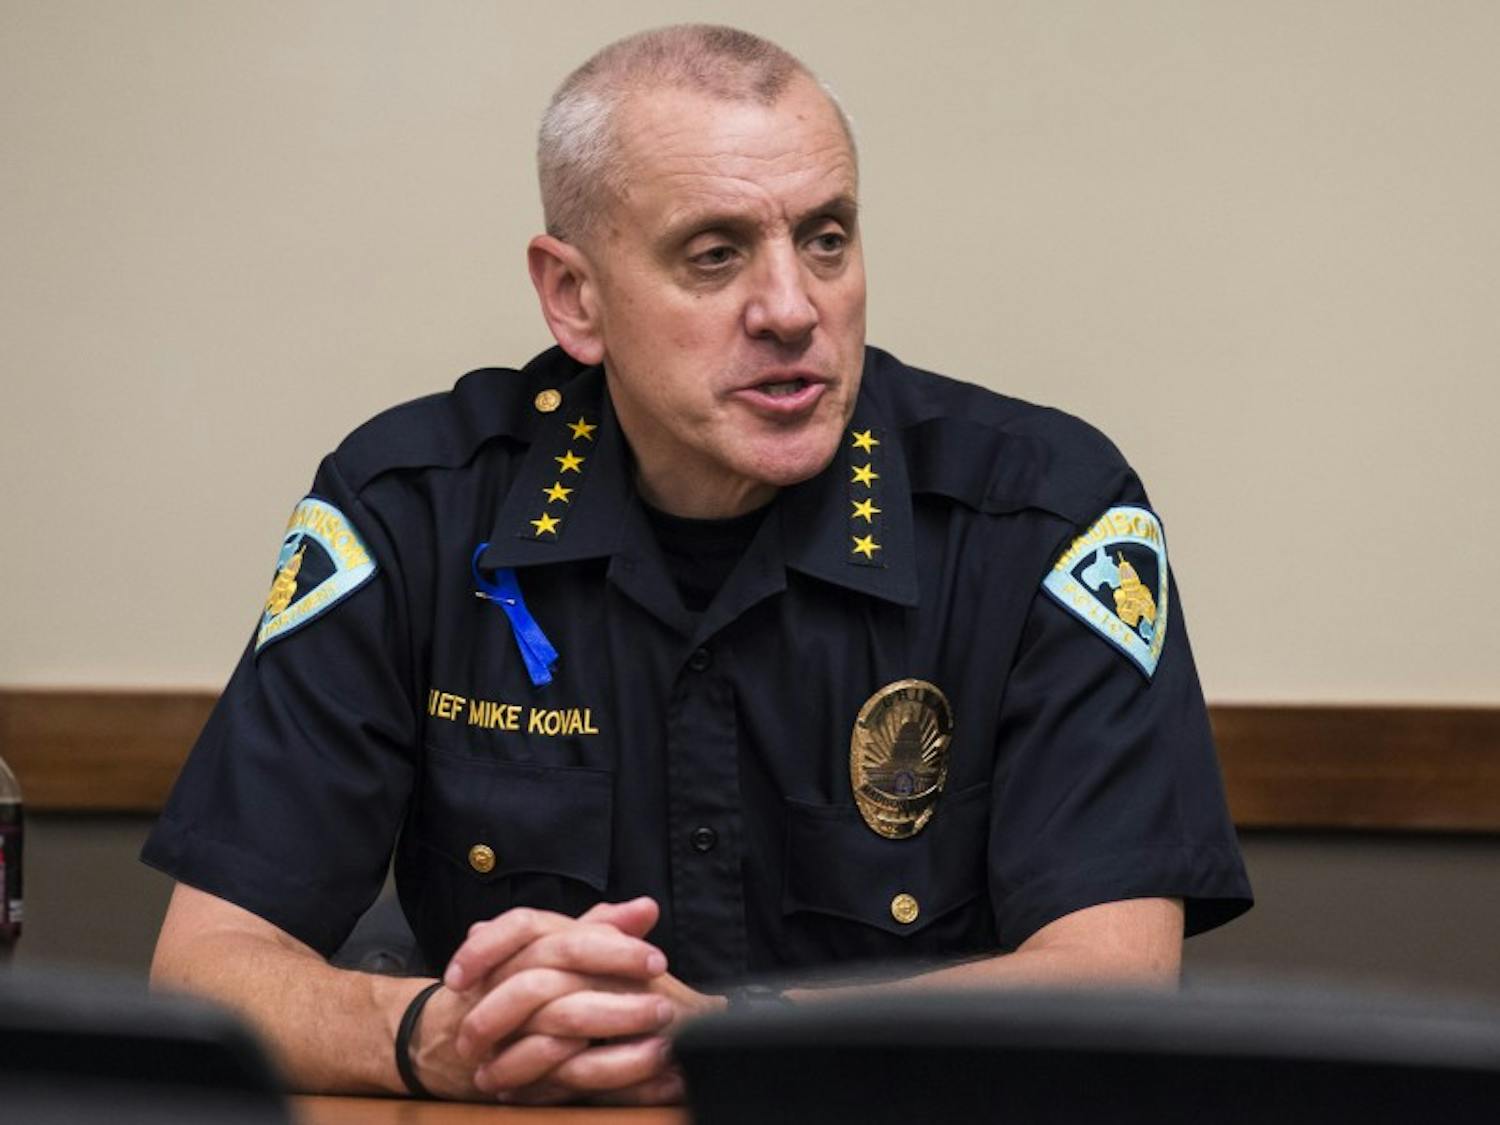 The city will further discuss paying nearly $22,000 in legal fees accumulated by Madison Police Department Chief Mike Koval between Sept. 6, 2016 through March 15, 2017. 